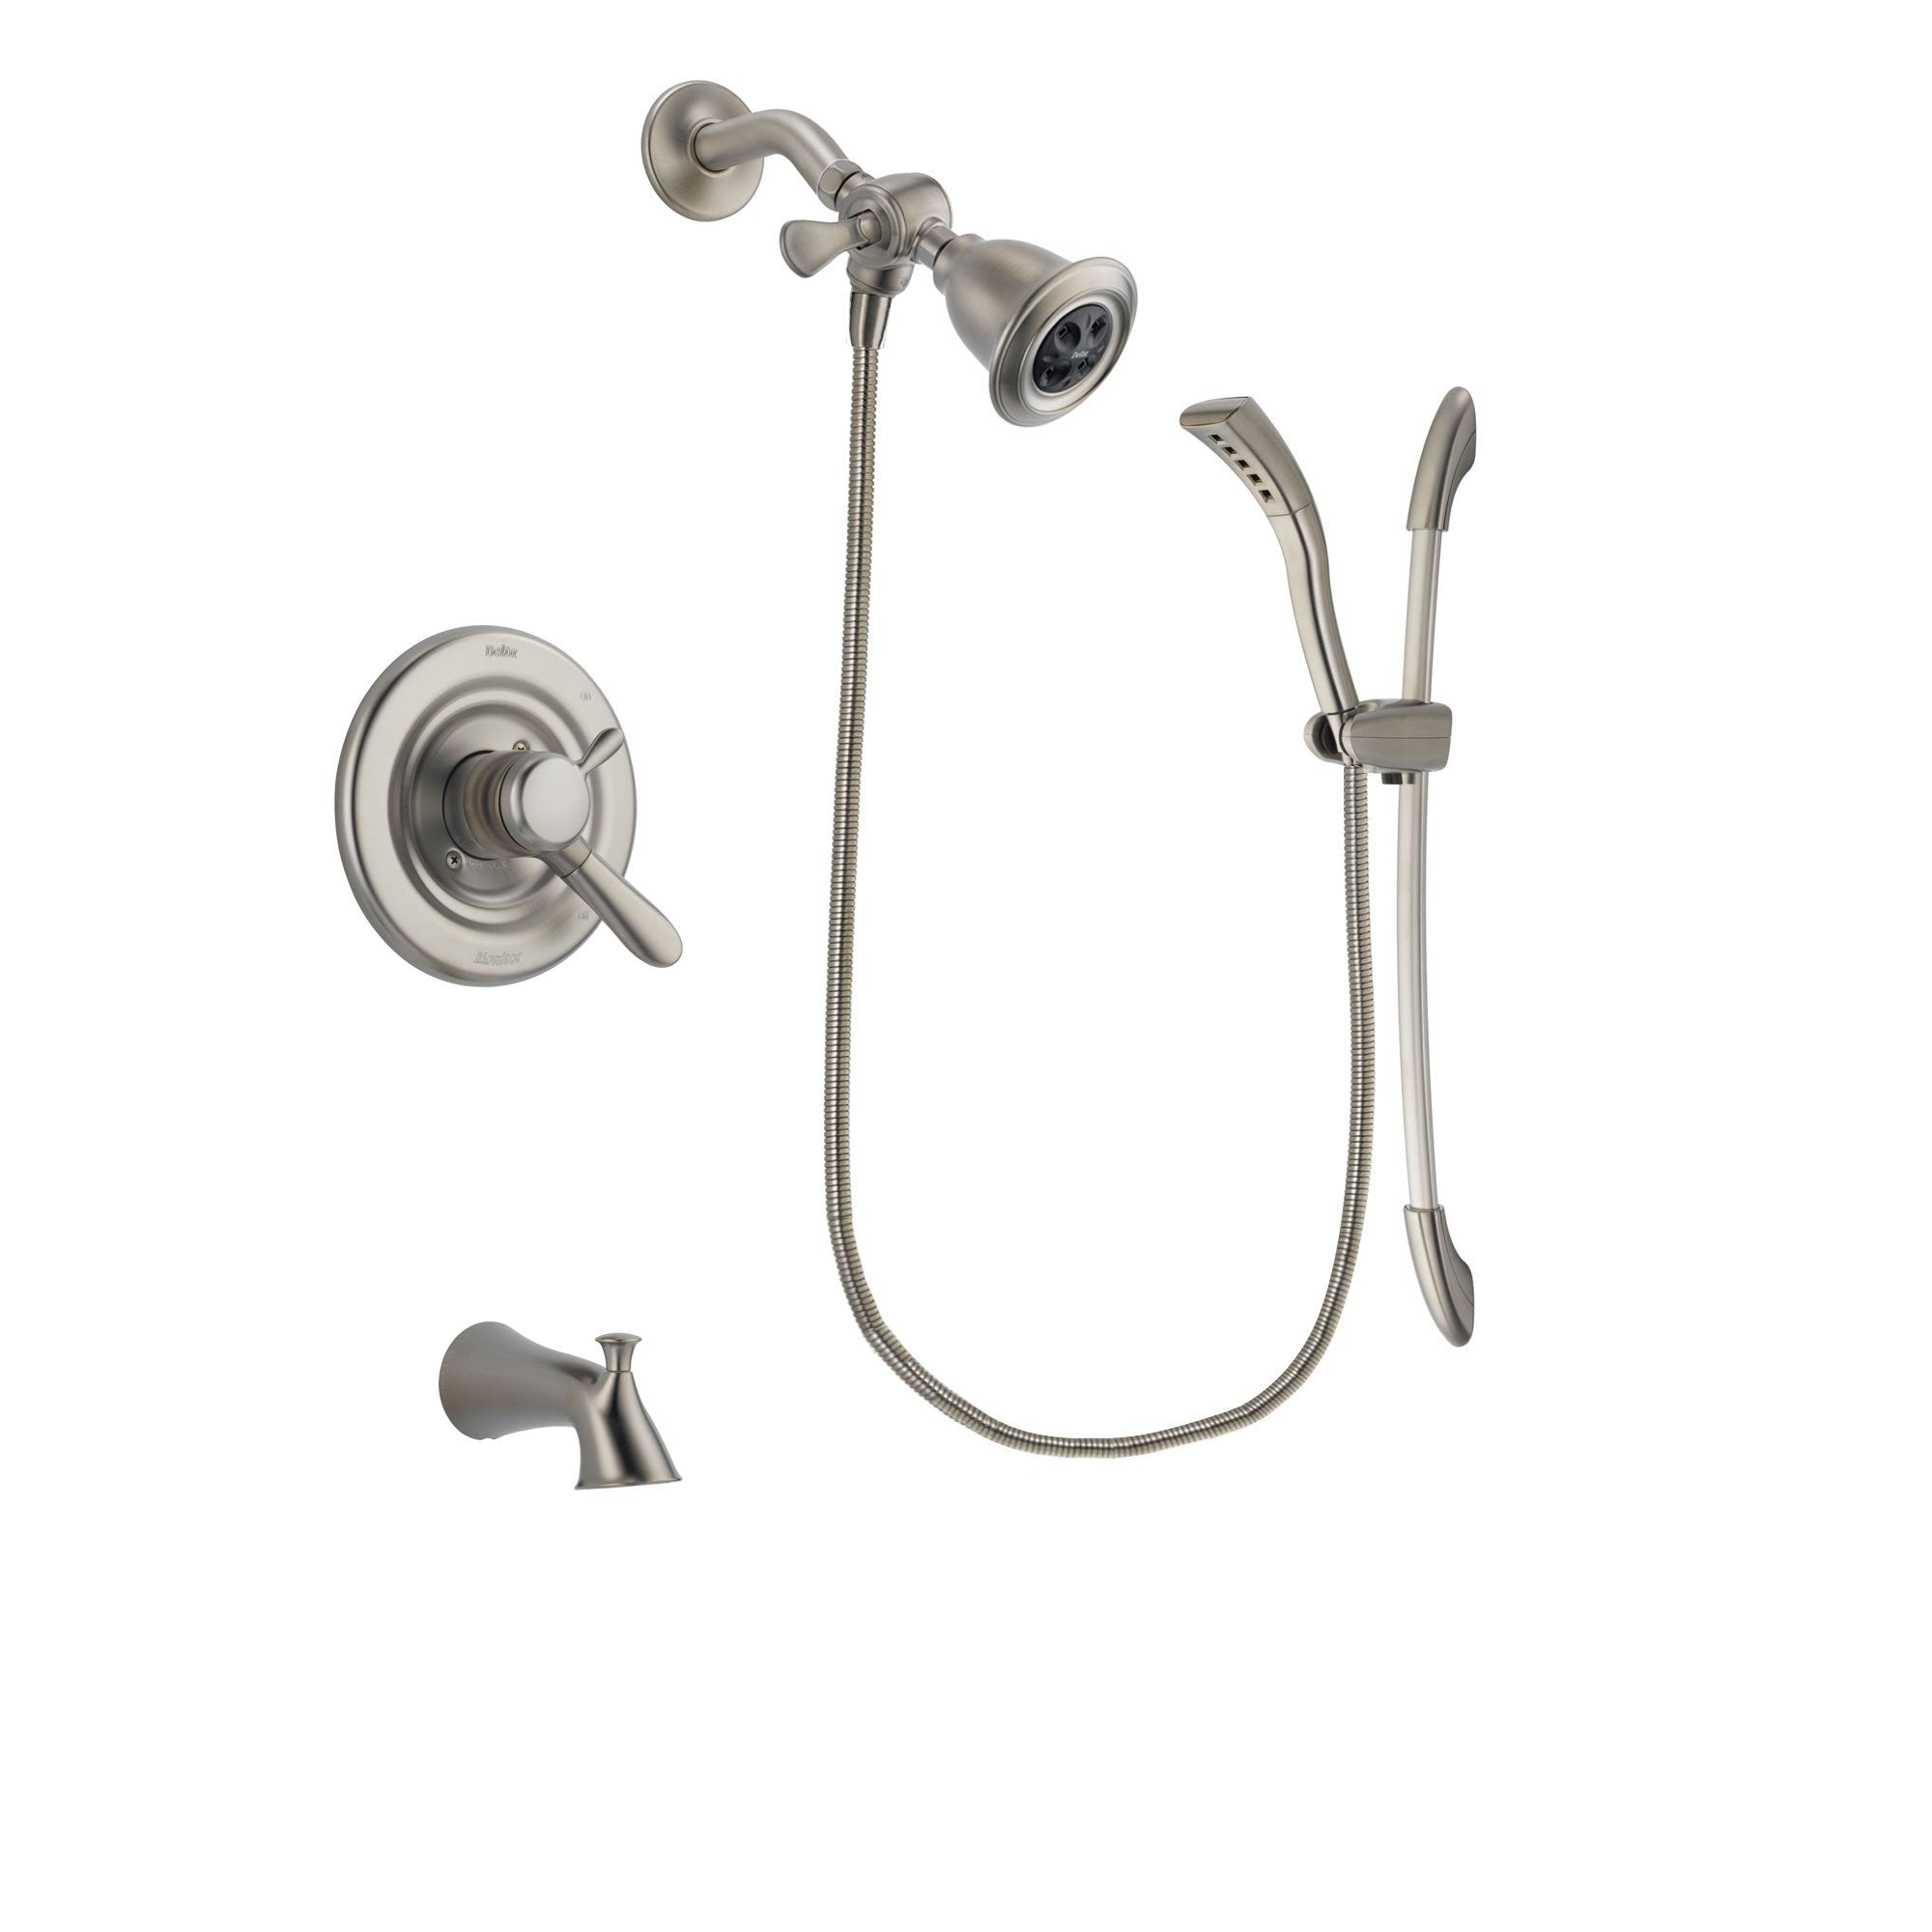 Delta Lahara Stainless Steel Finish Dual Control Tub and Shower Faucet System Package with Water Efficient Showerhead and Handshower with Slide Bar Includes Rough-in Valve and Tub Spout DSP1431V